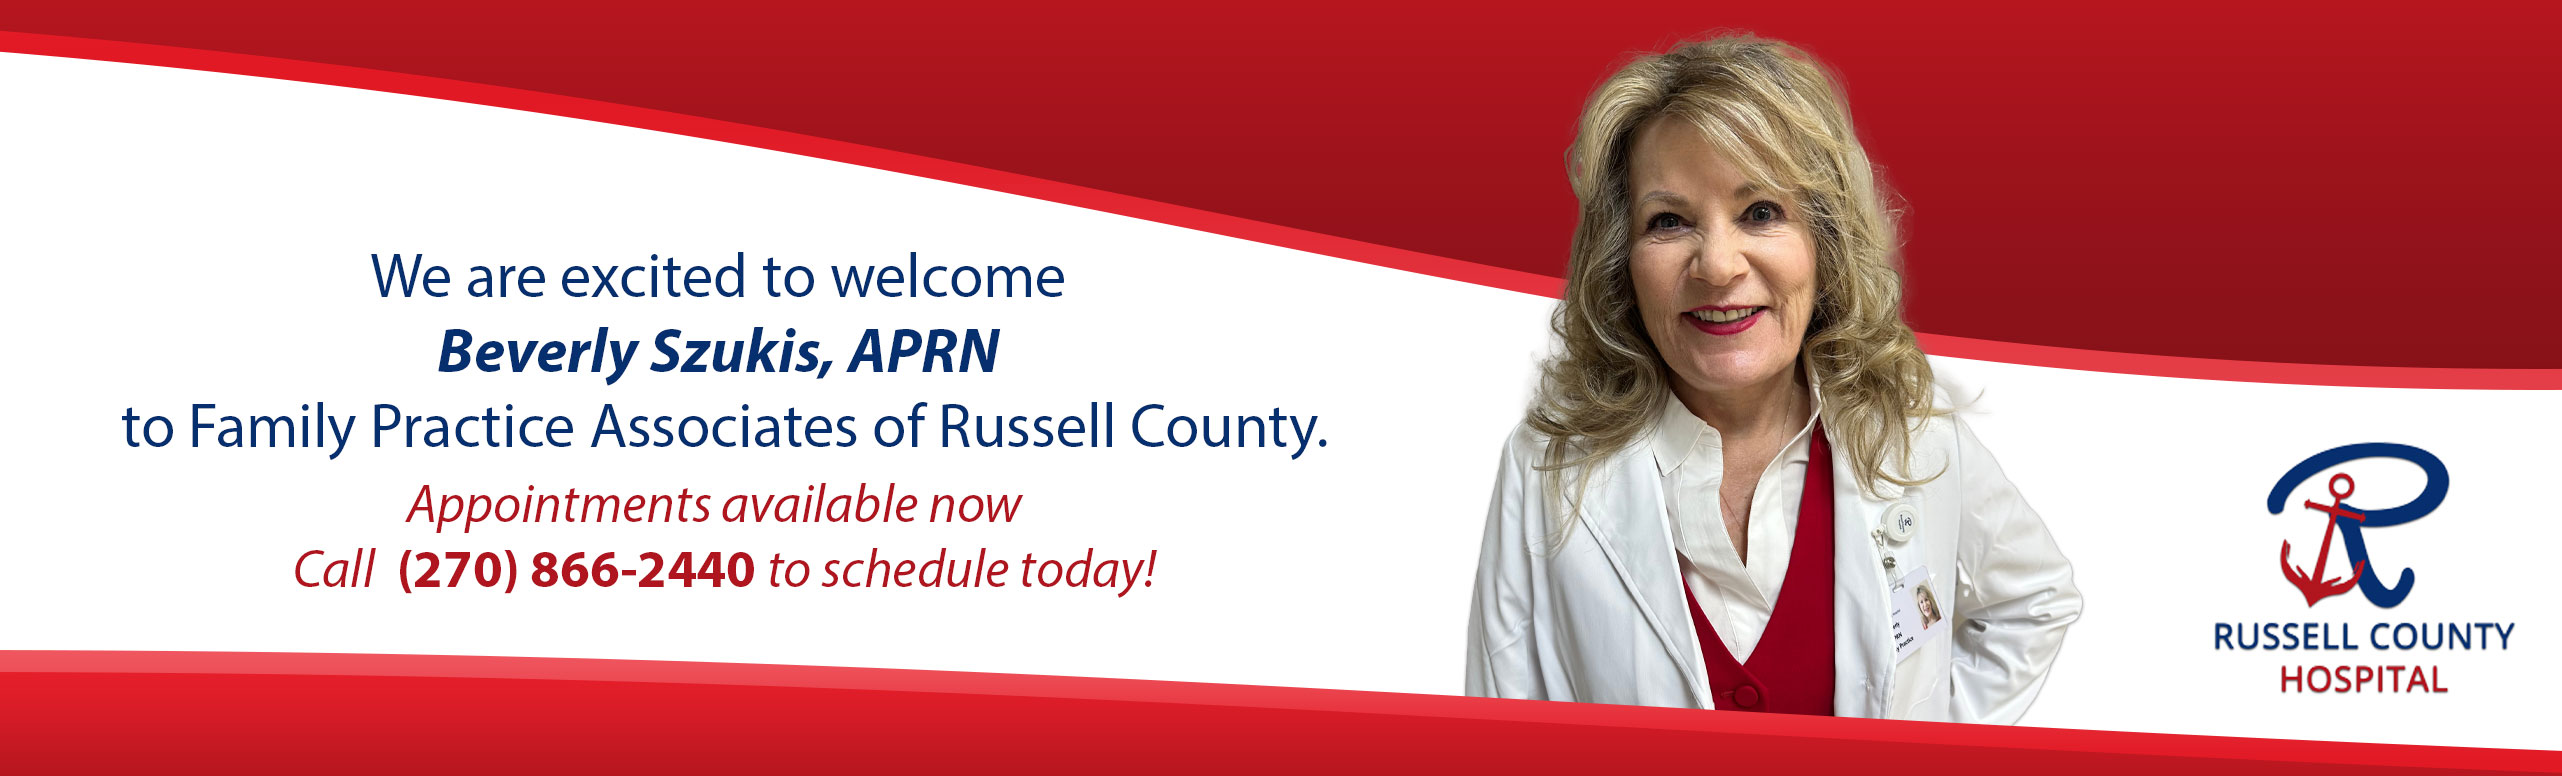 We are excited to welcome Beverly Szukis, APRN to Family Practice Associates of Russell County.

Appointments available now  
Call  (270) 866-2440 to schedule today!